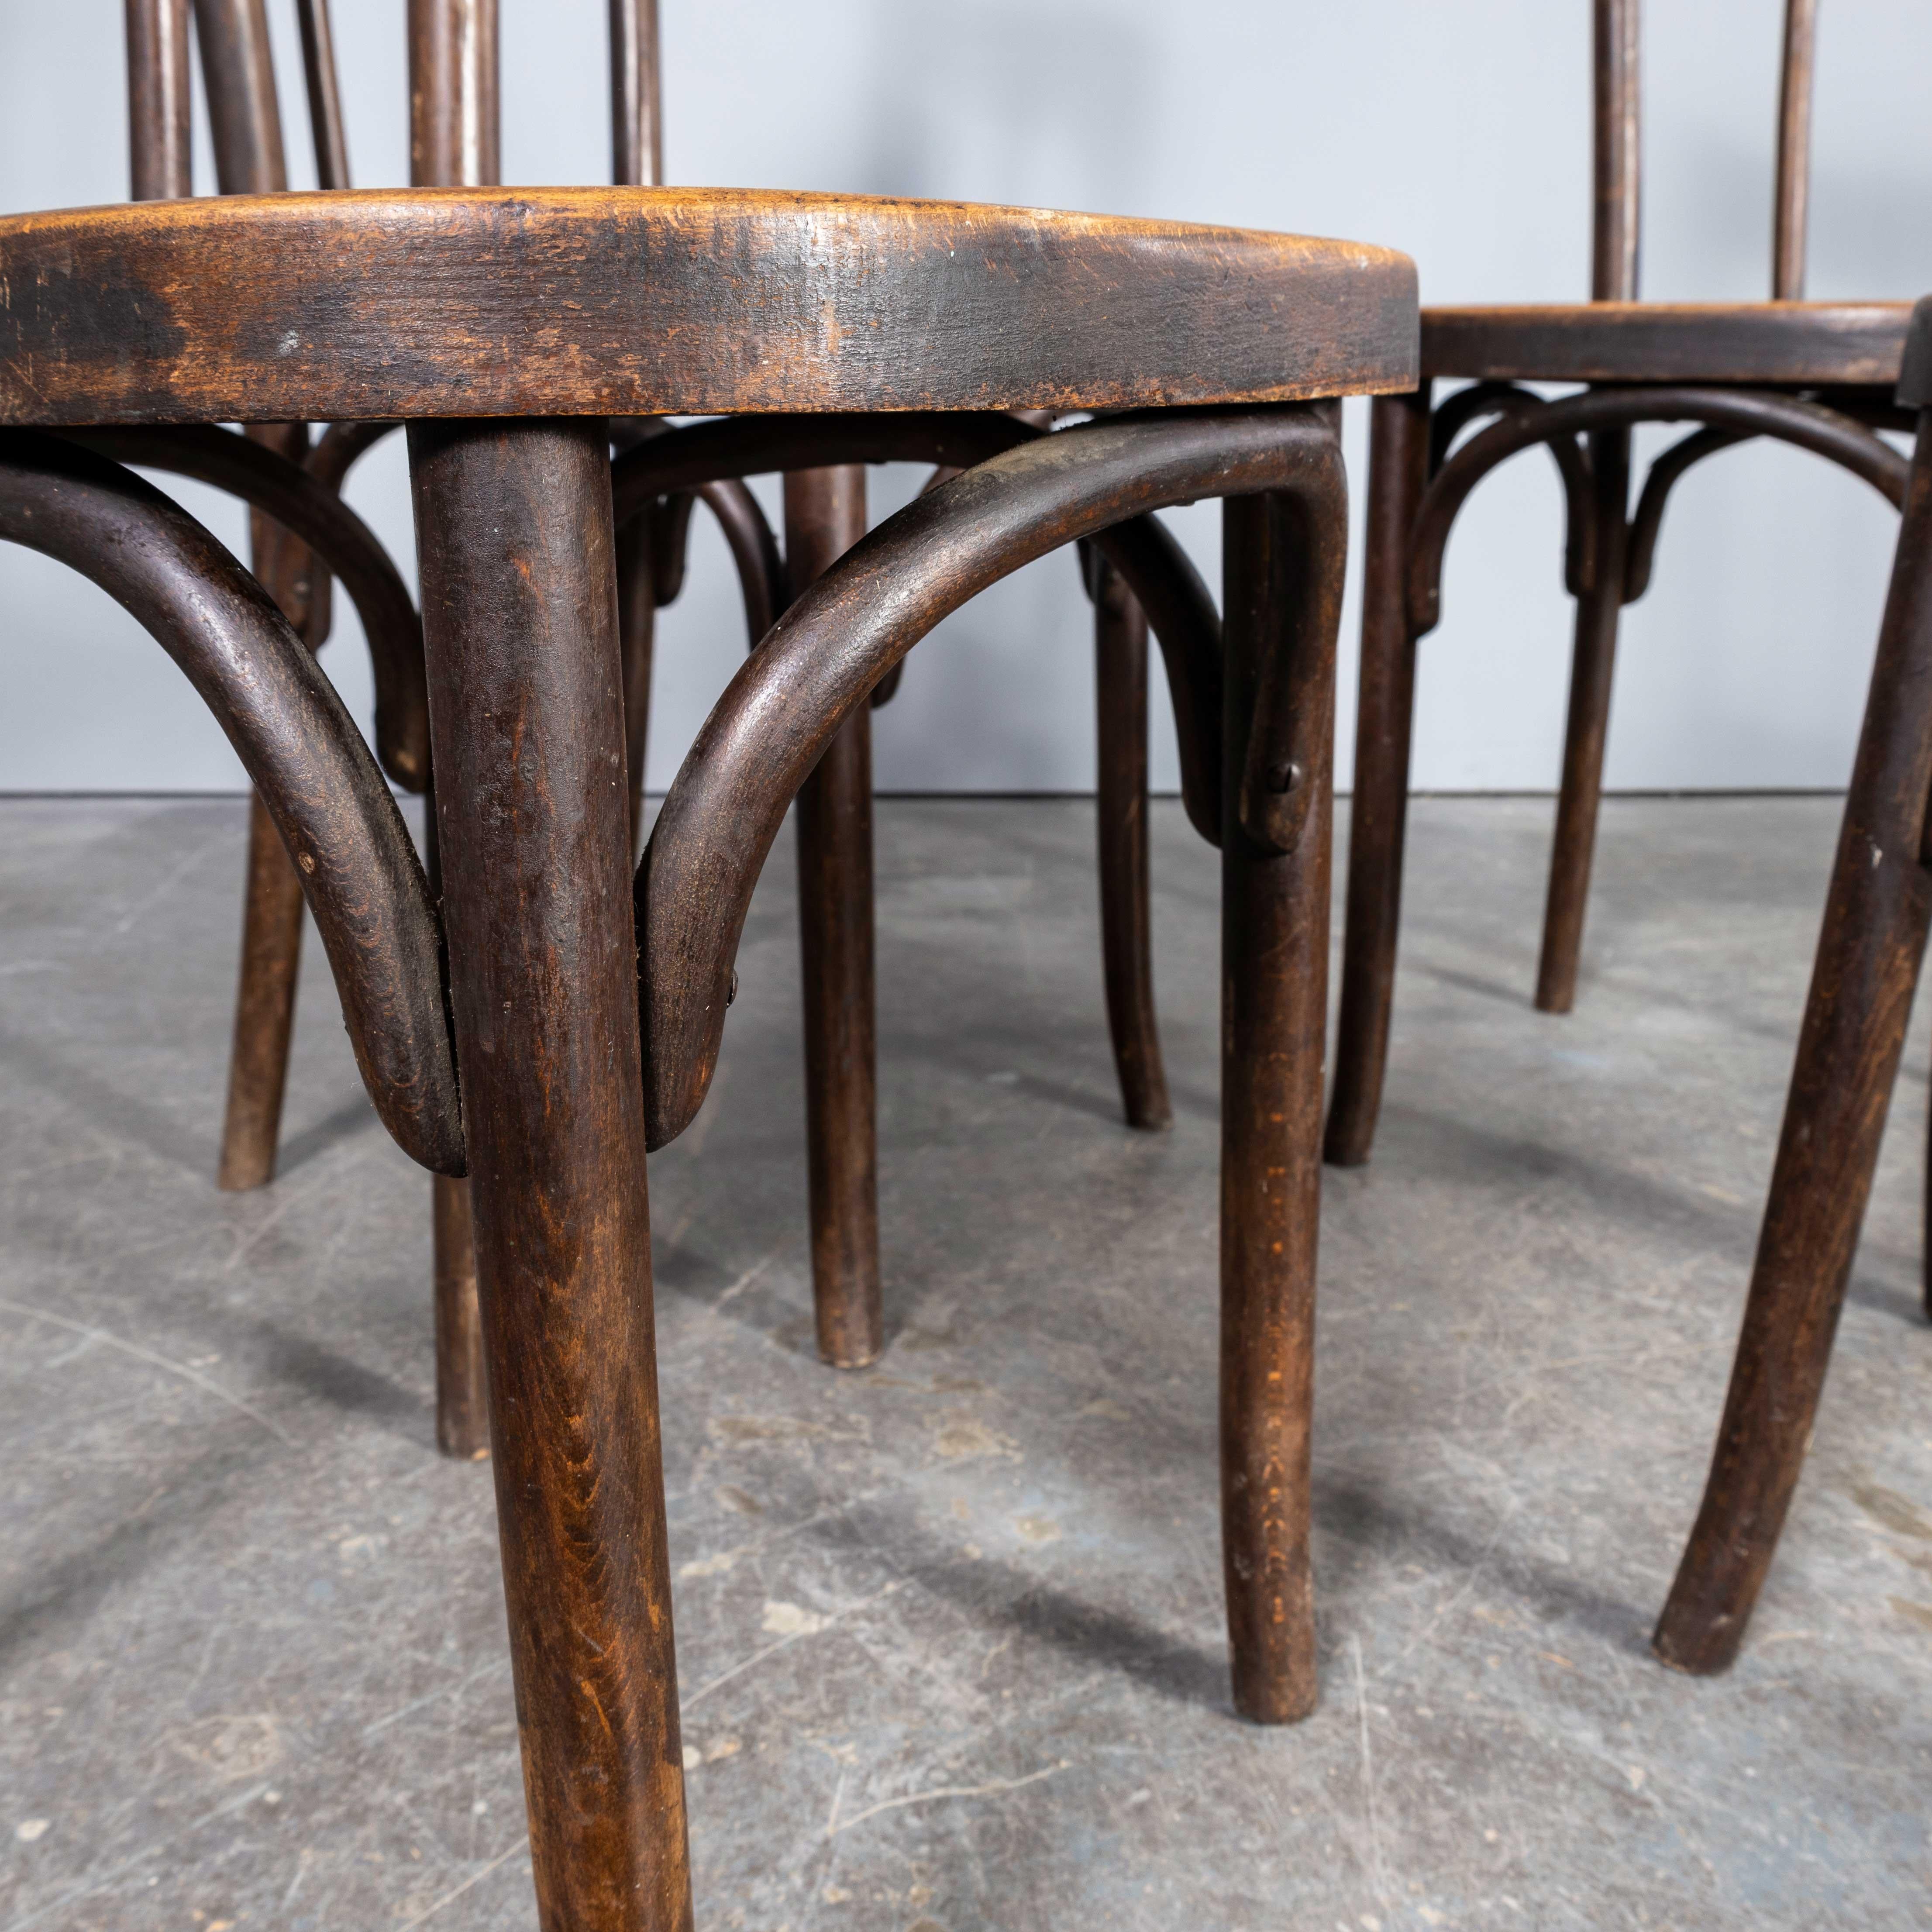 1910’s Bentwood Debrecen Early Hoop Back Dining Chairs – Set Of Four
1910’s Bentwood Debrecen Early Hoop Back Dining Chairs – Set Of Four. It is hard to be precise about the origin of these chairs as they are not labelled, but what we do know is at